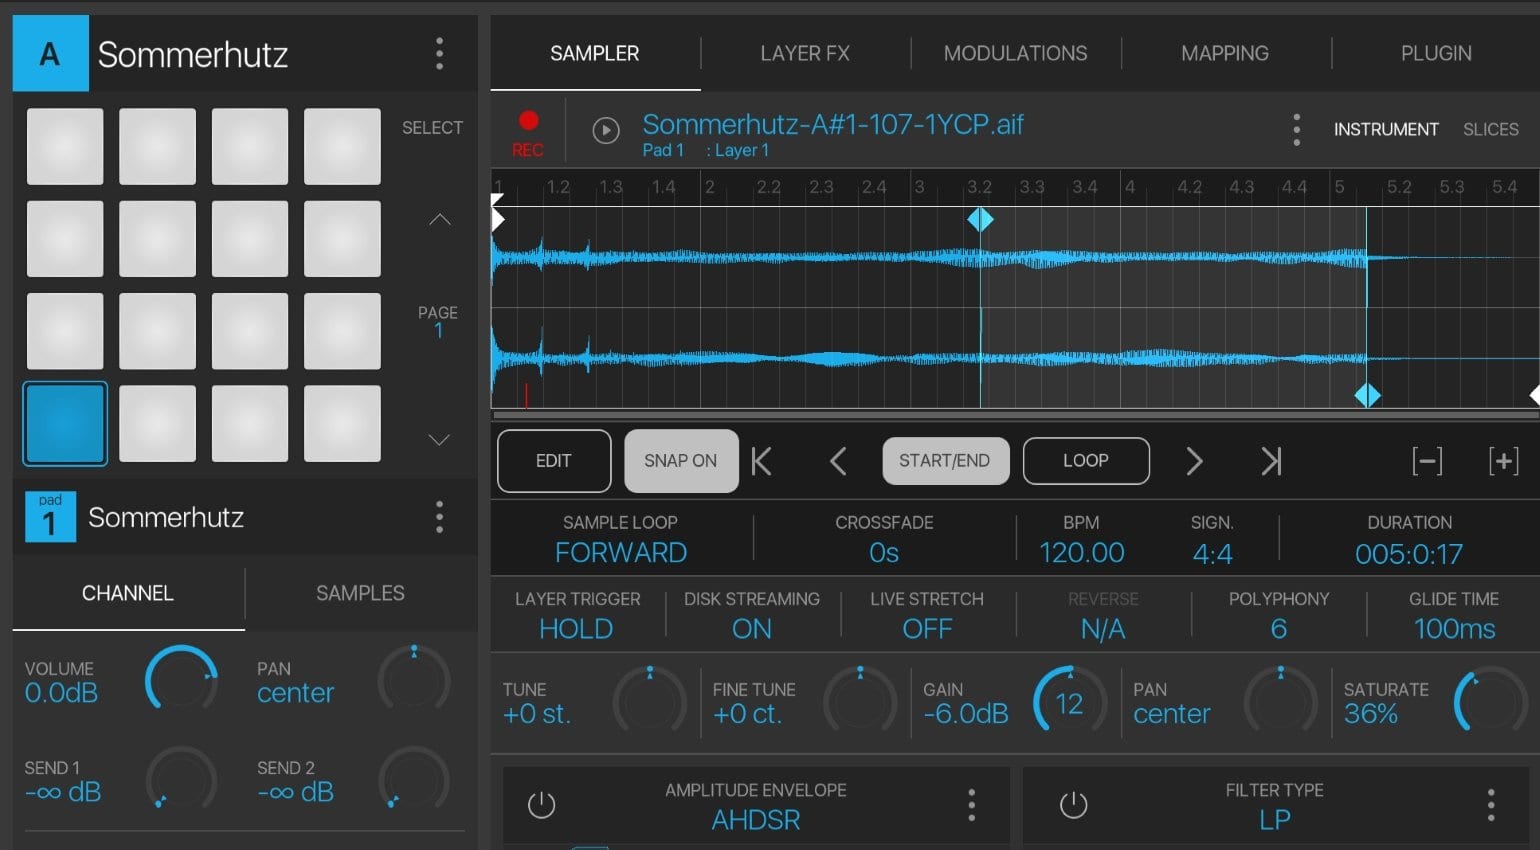 beatmaker 3 for iphone